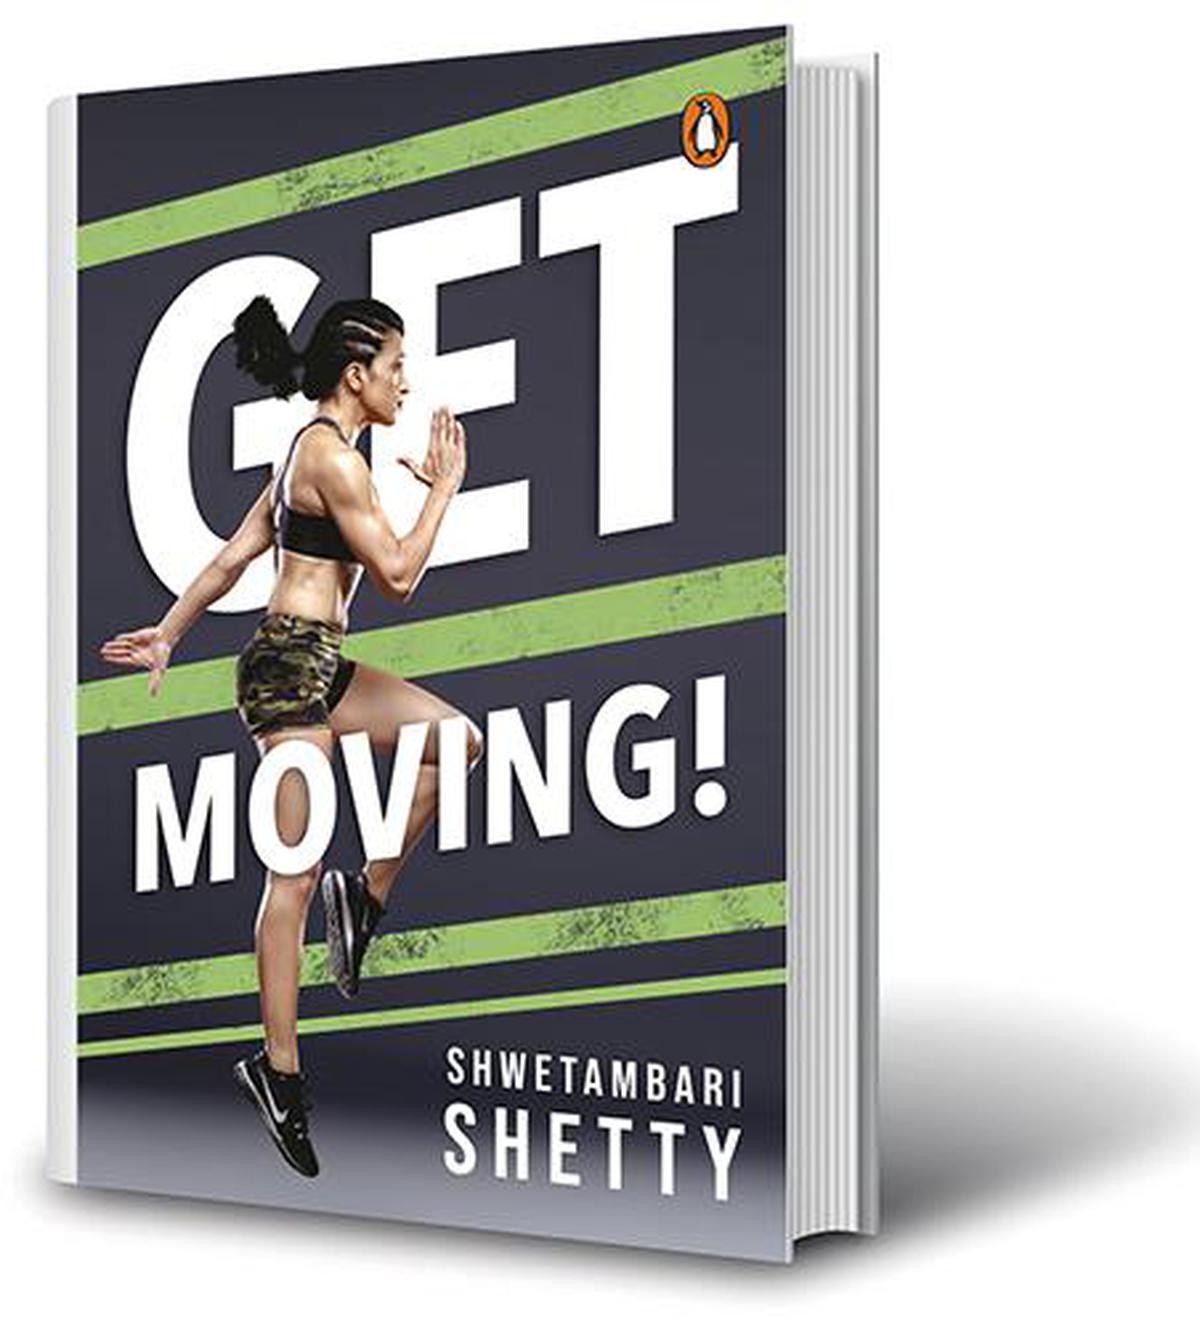 Stop being a desk potato and get moving. This book tells you how